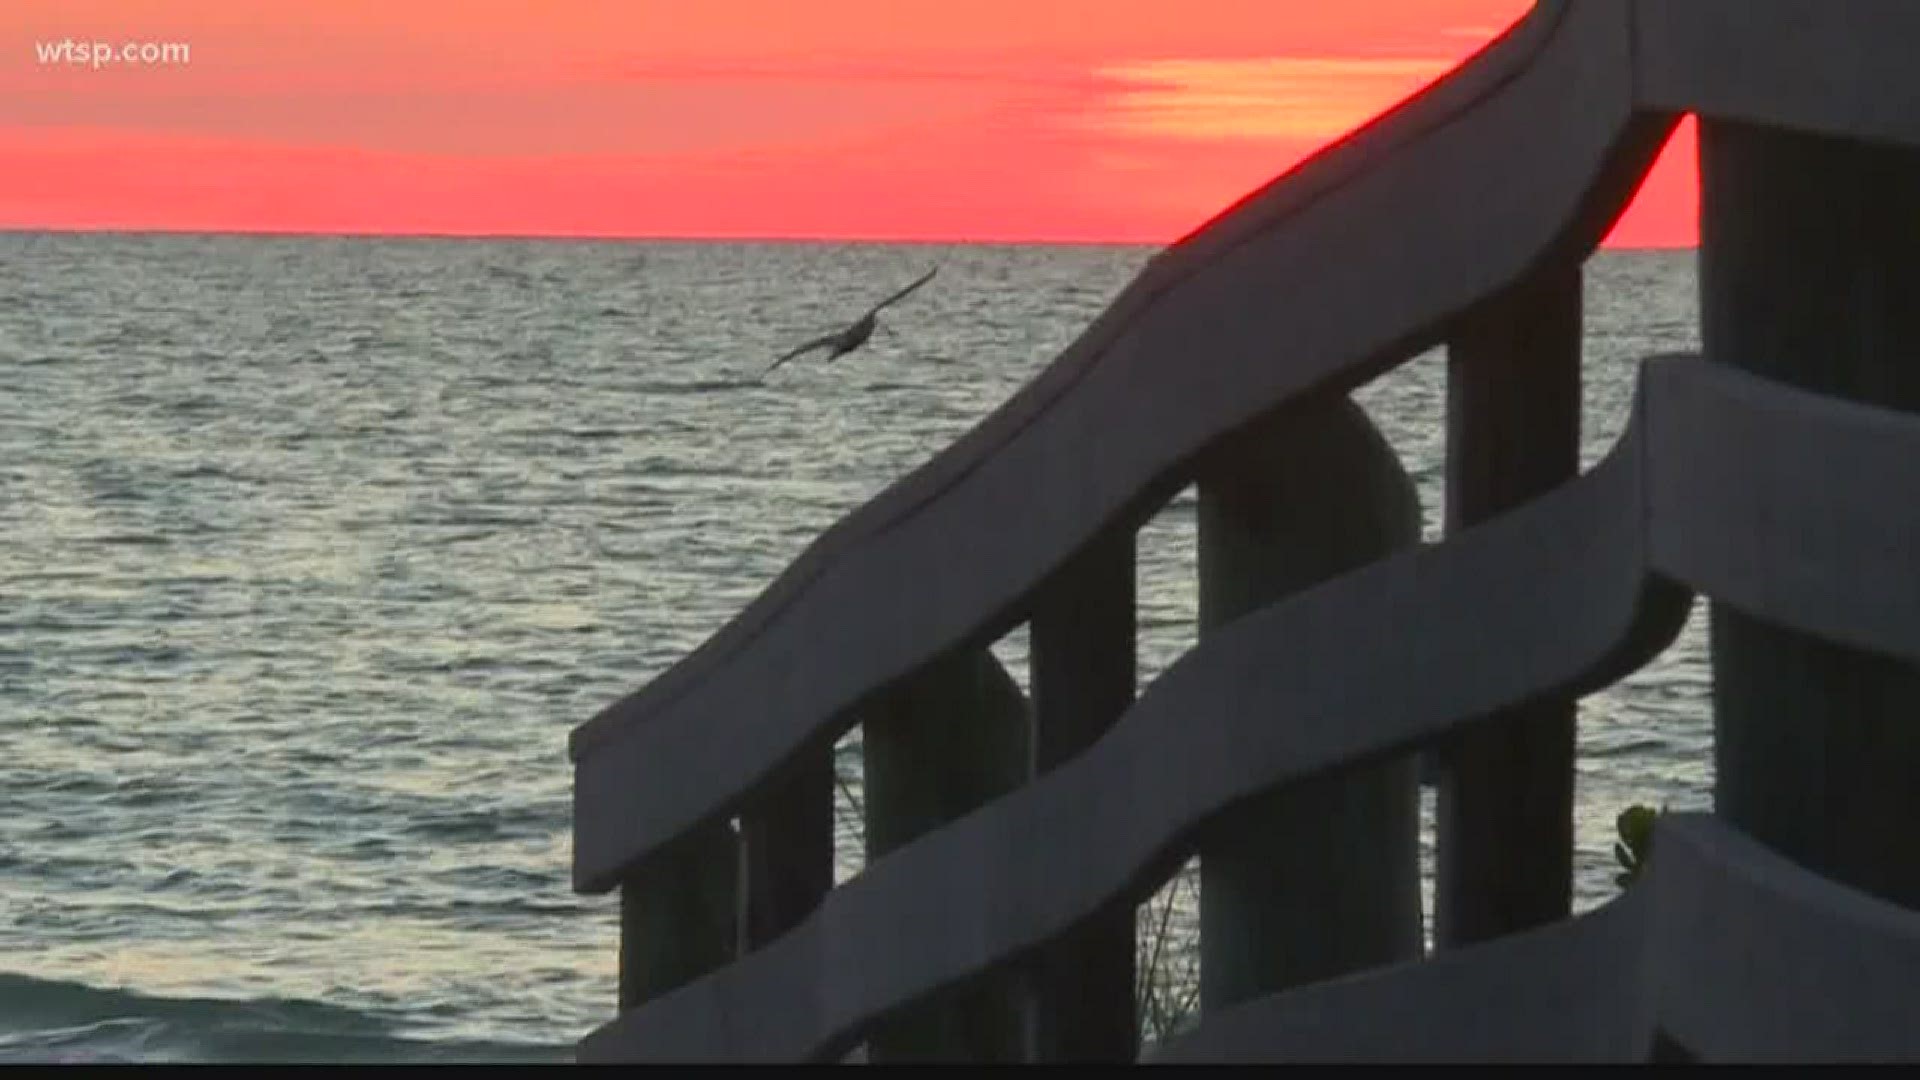 Commissioners voted Tuesday to reopen local beaches as Florida continues to plan for a phased reopening of the state.